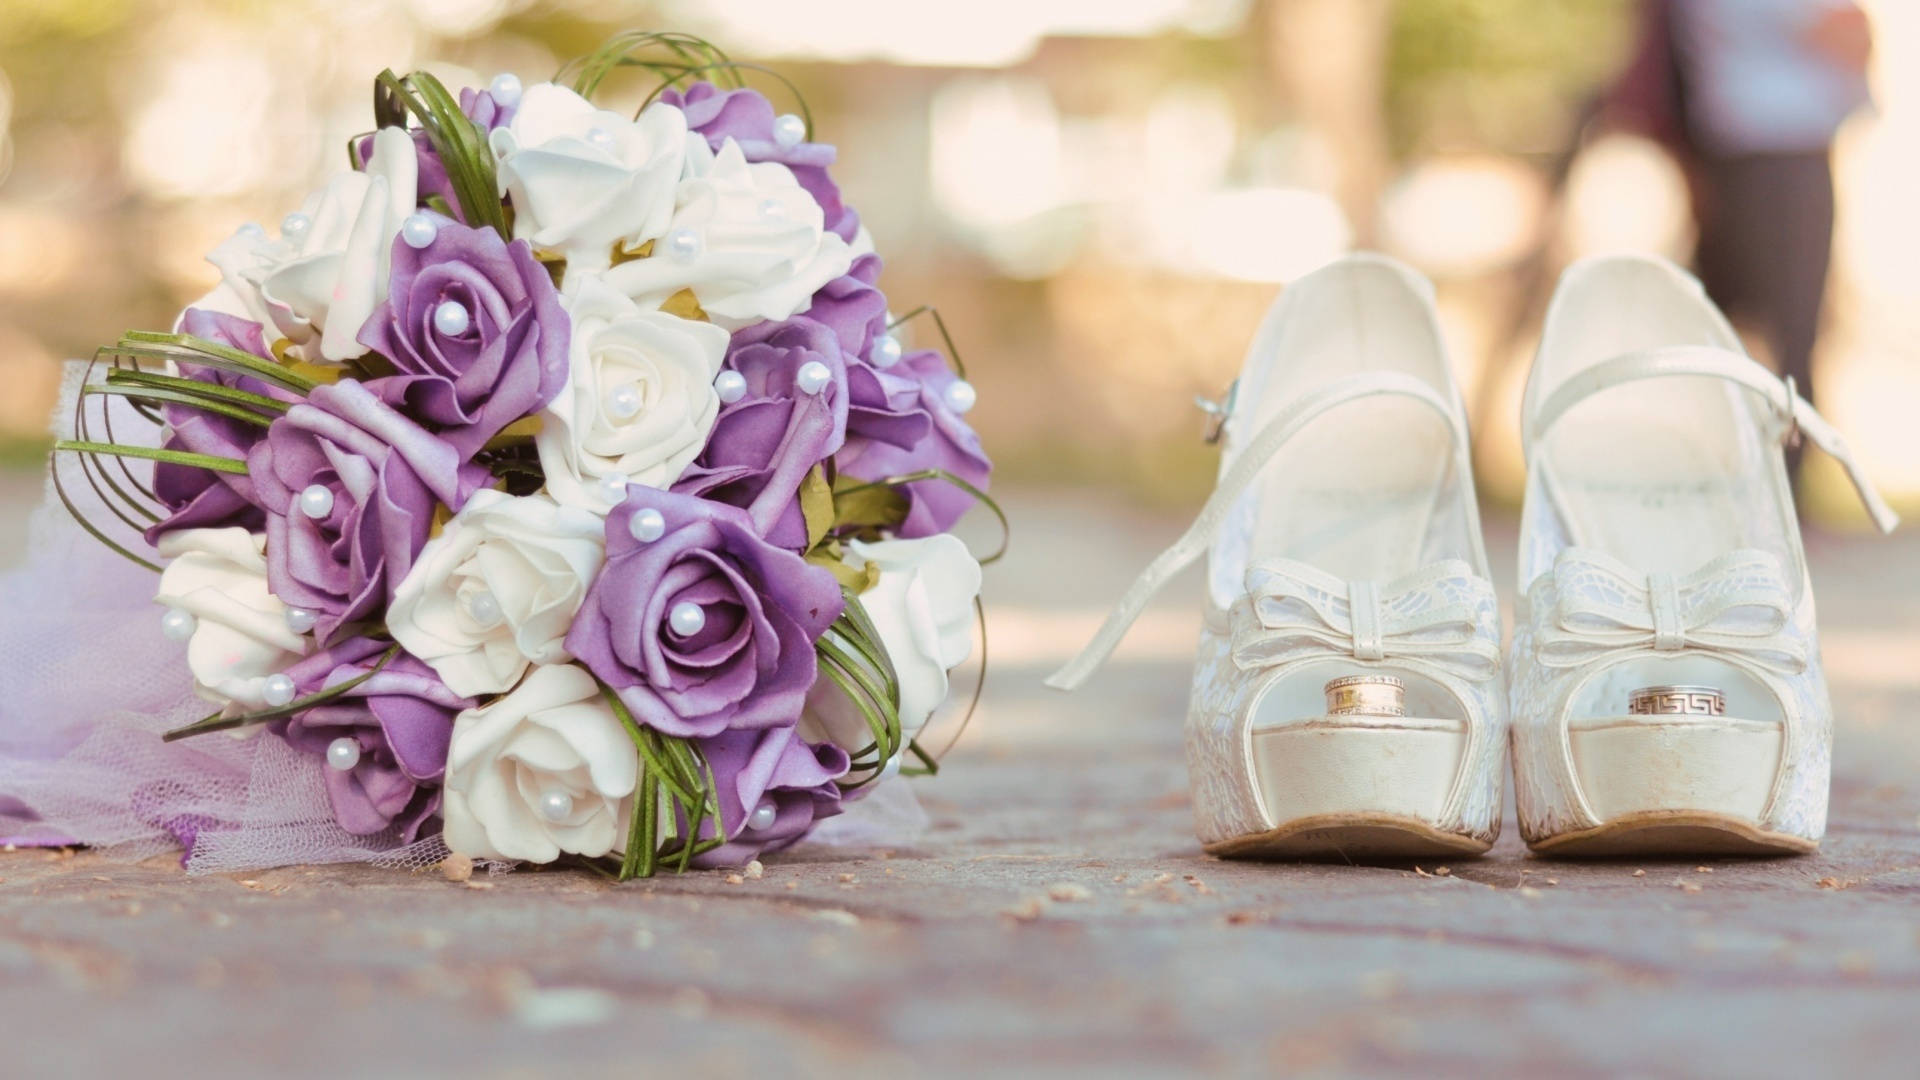 Bridal Shoes And Bouquet Wallpaper